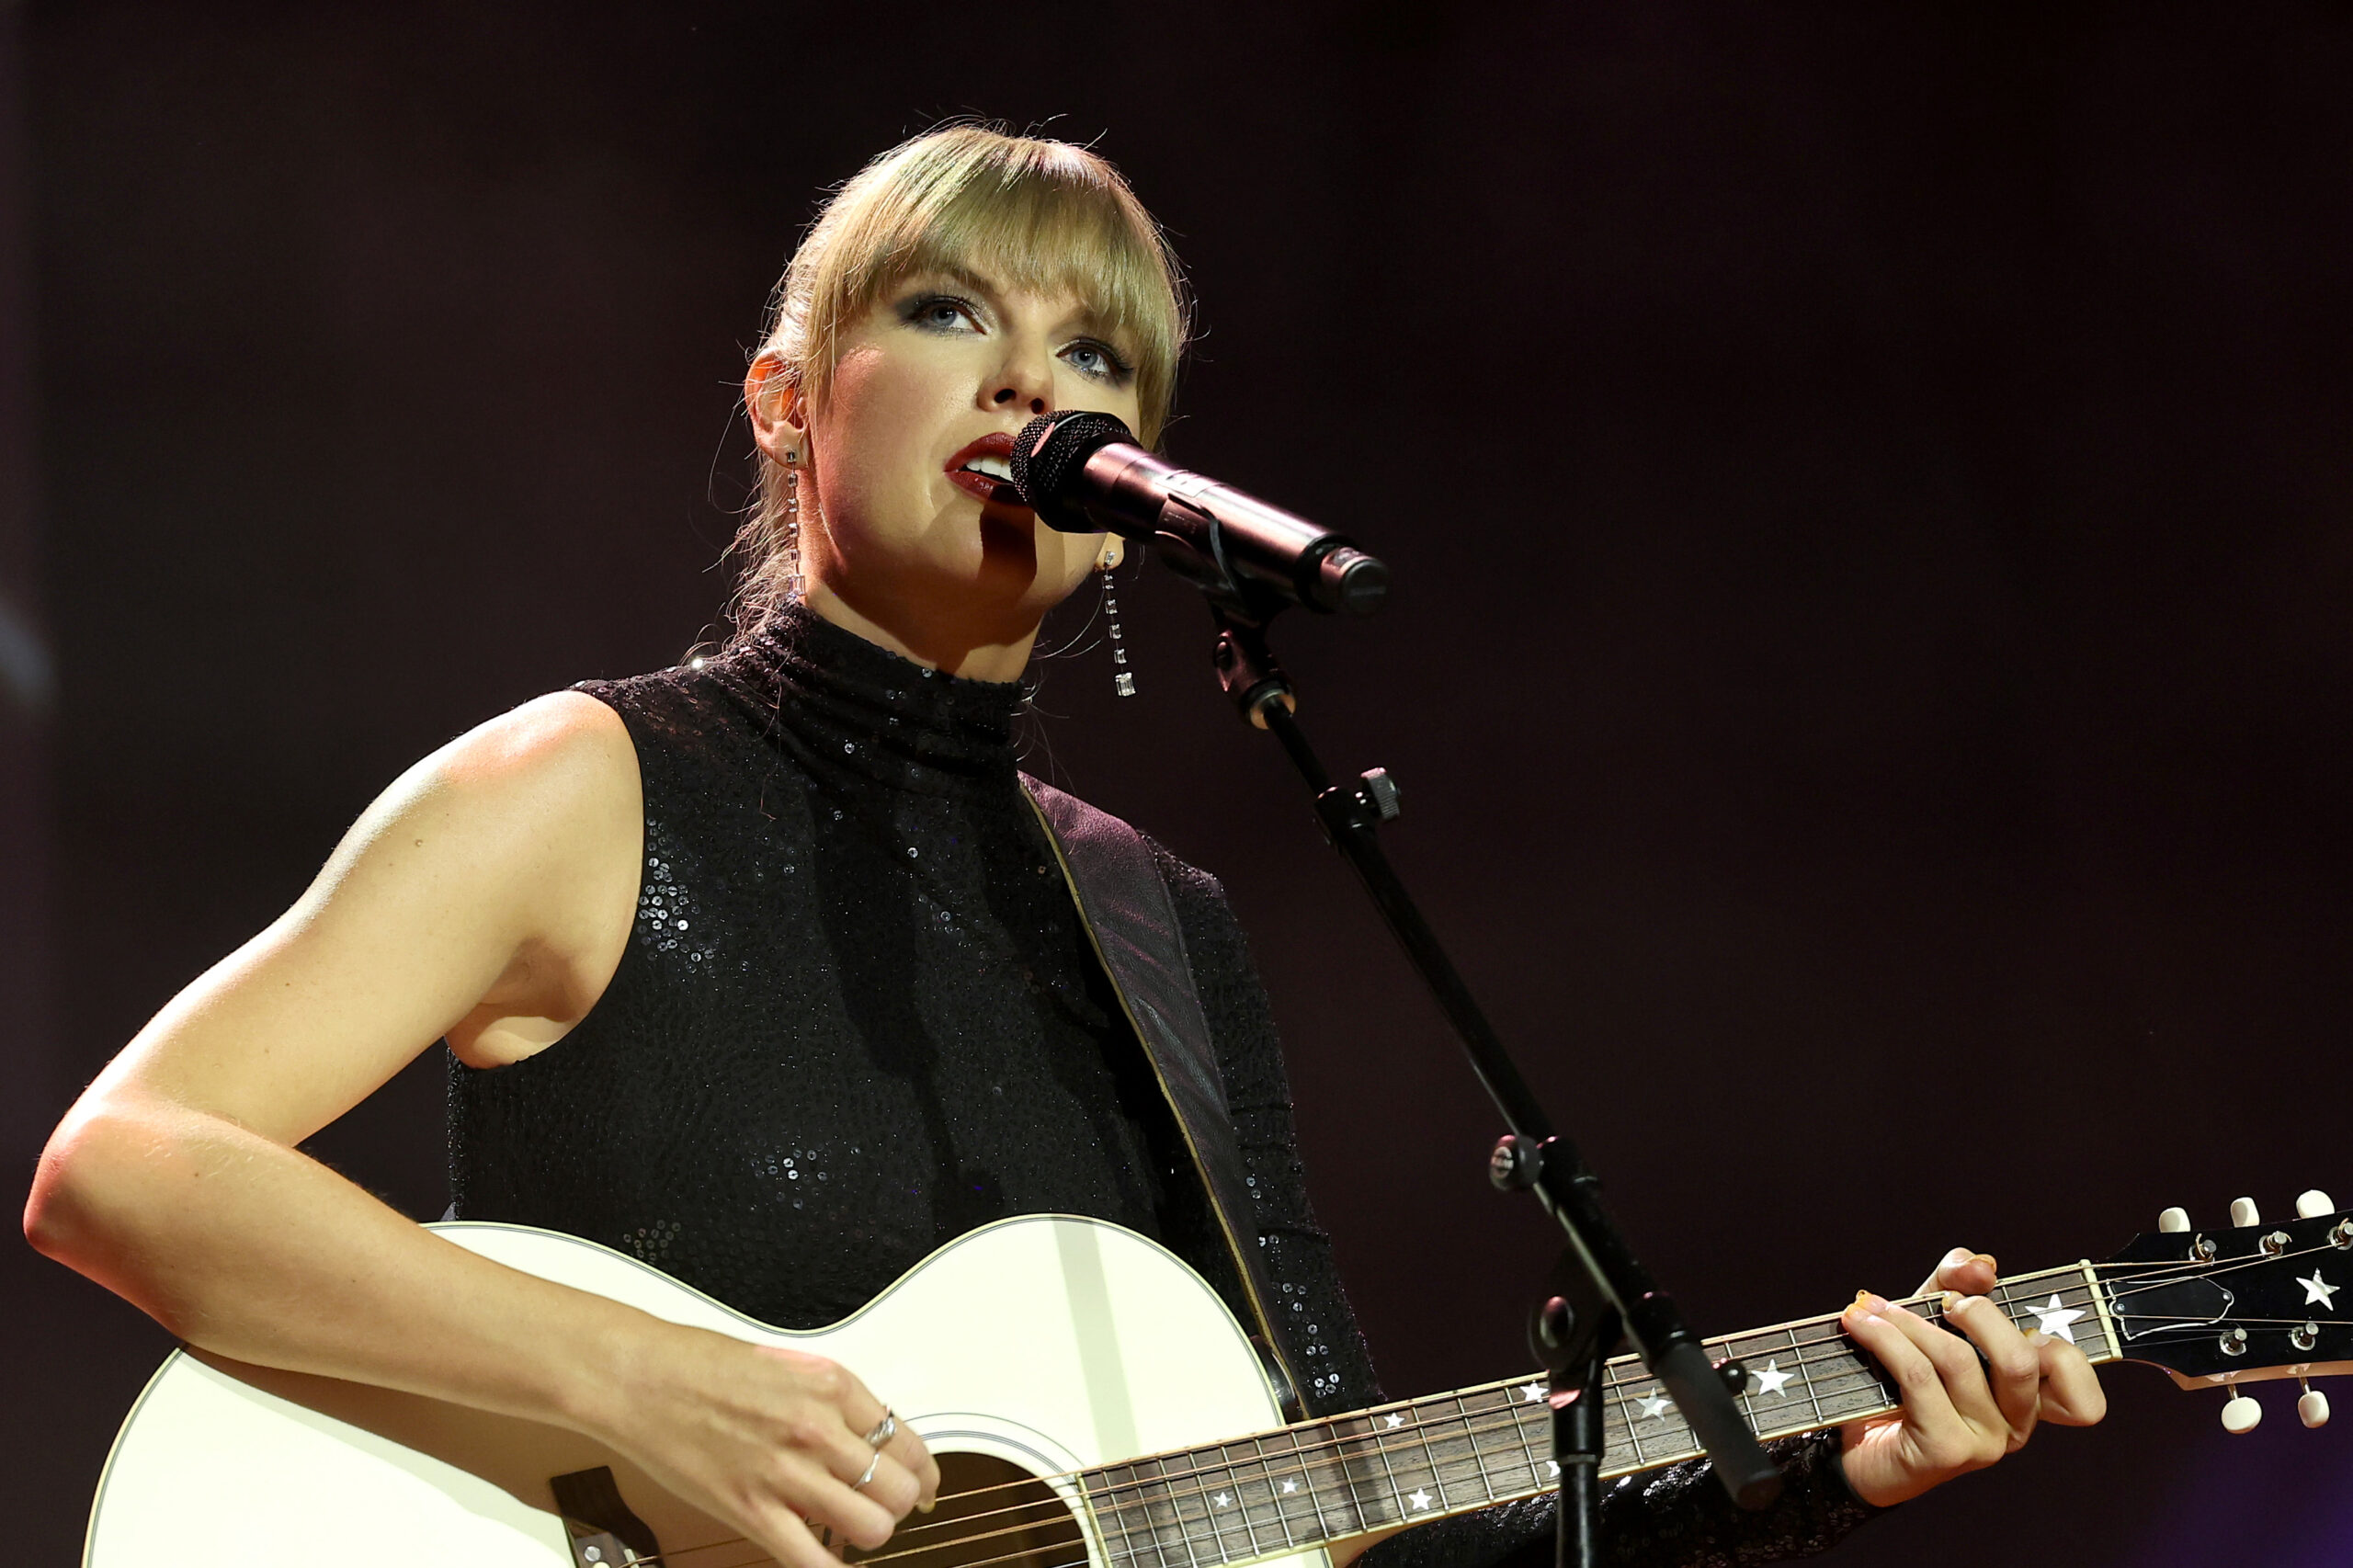 Taylor Swift Releases A Surprise Song Teaser: How a Google Glitch